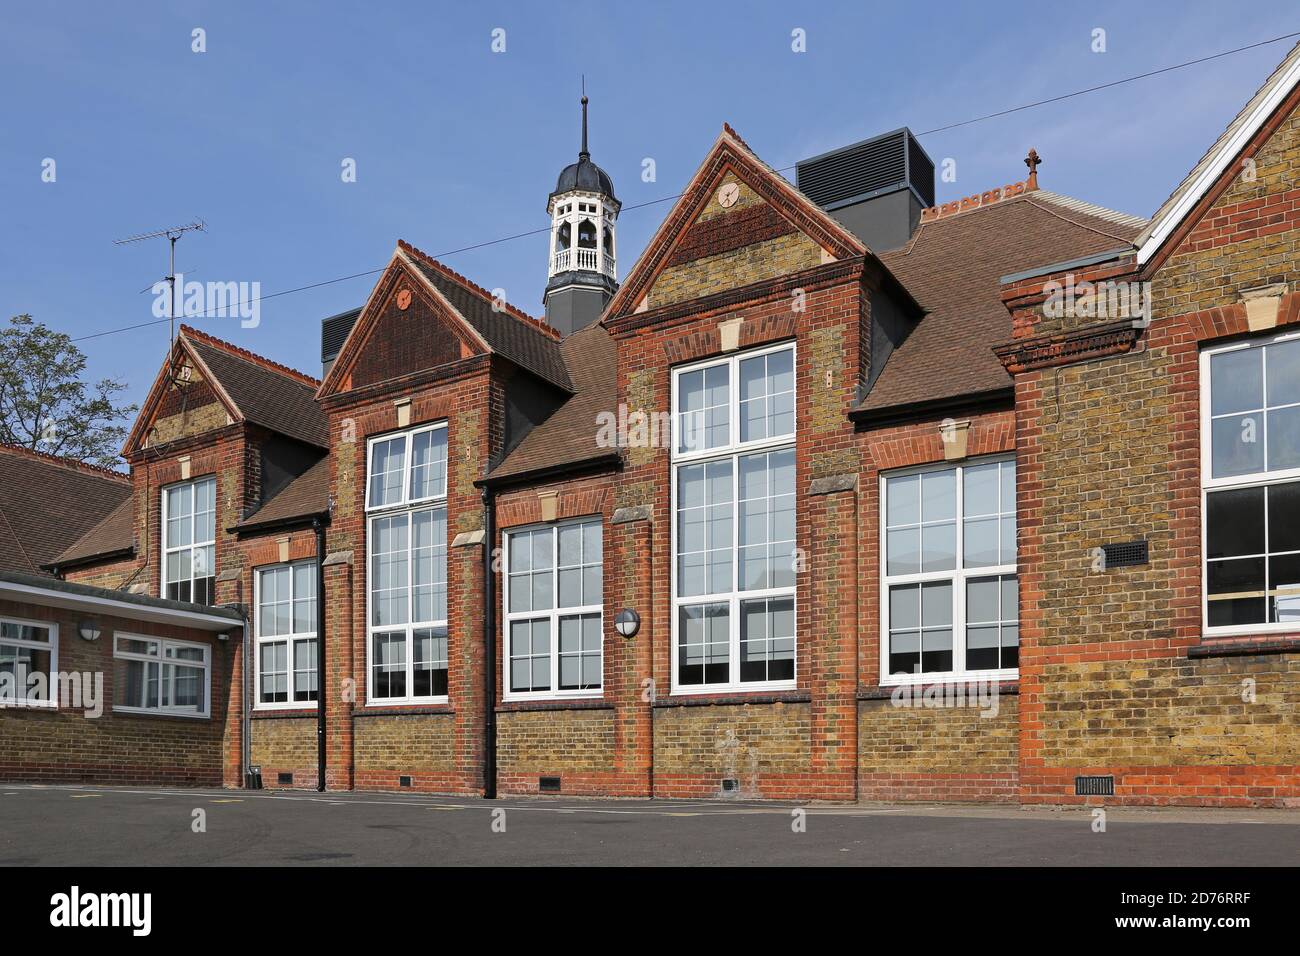 Newly refurbished Victorian school building in Dartford, Kent, UK. Shows traditional school bell tower and new air handling units on roof. Stock Photo